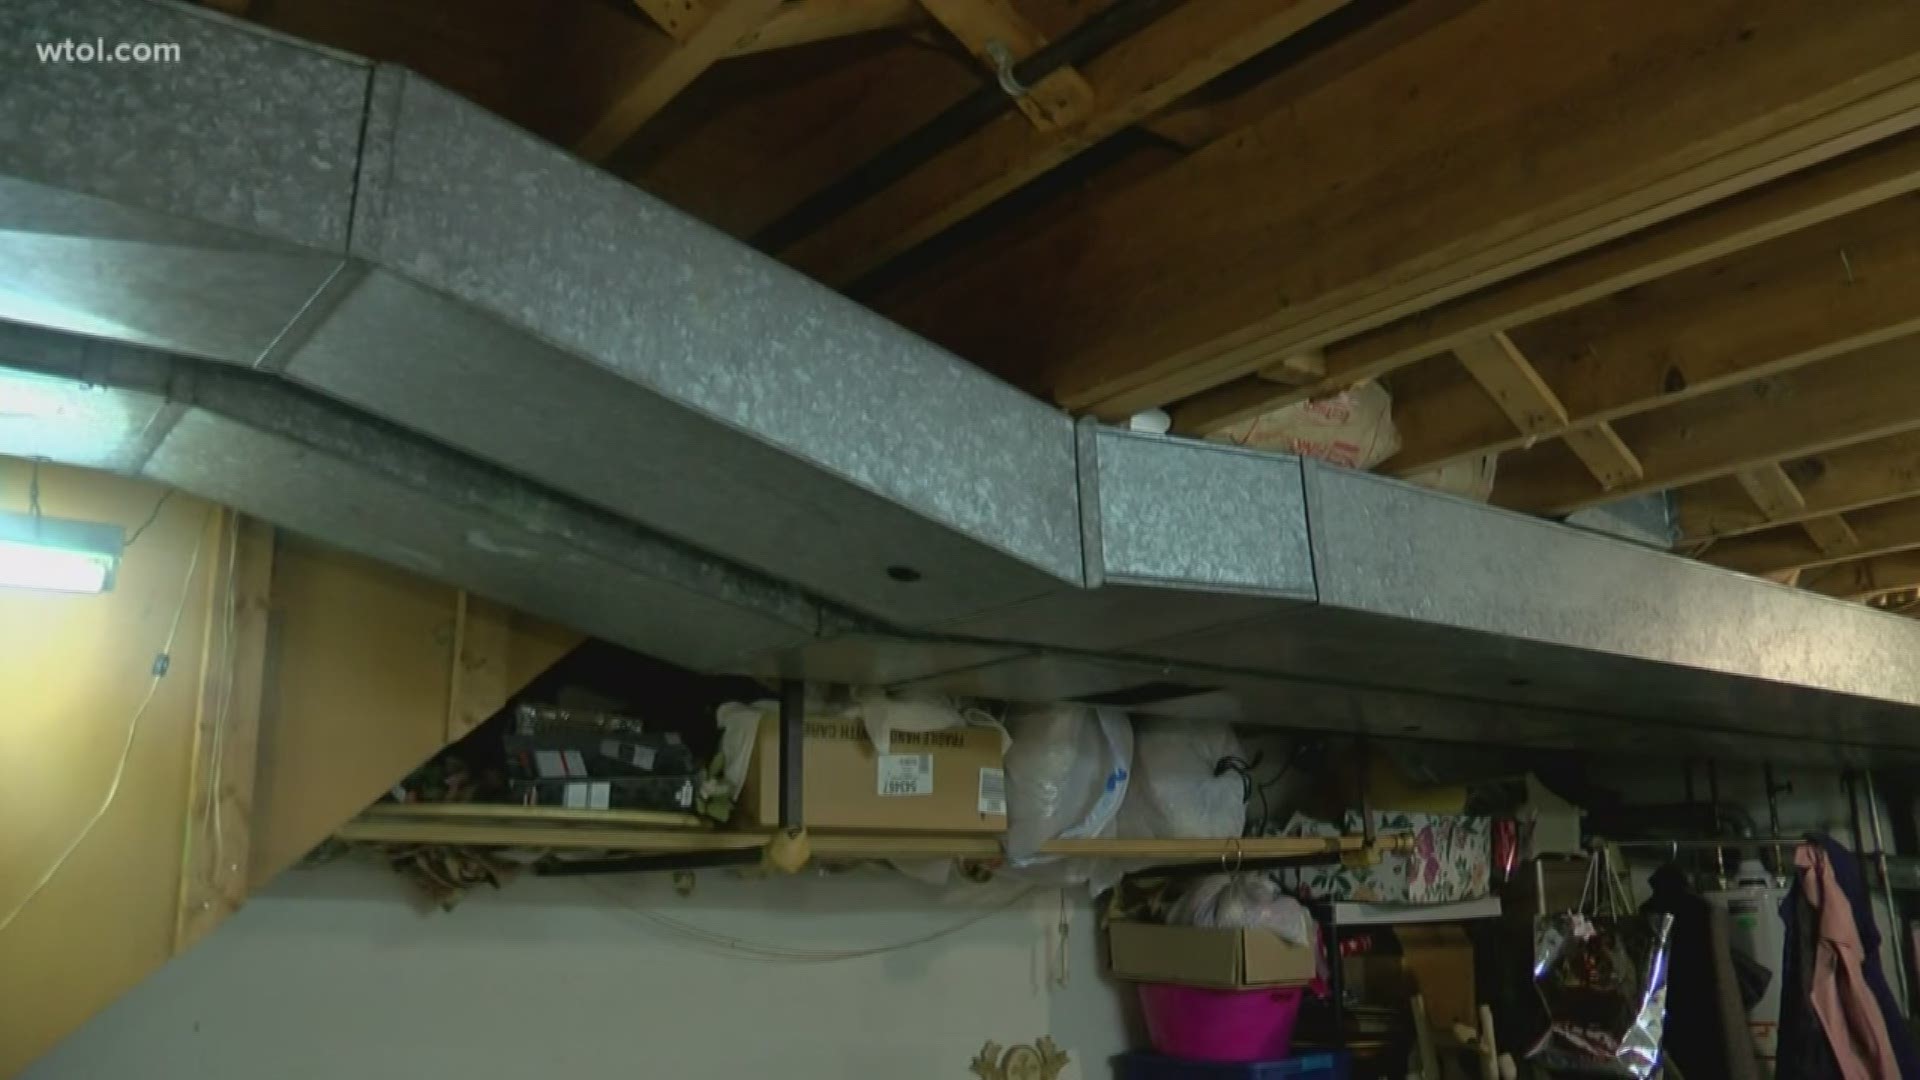 A west Toledo woman claims she was ripped off by a local duct cleaning company. The business owner disputes that, but issued a refund when WTOL stepped in to help.